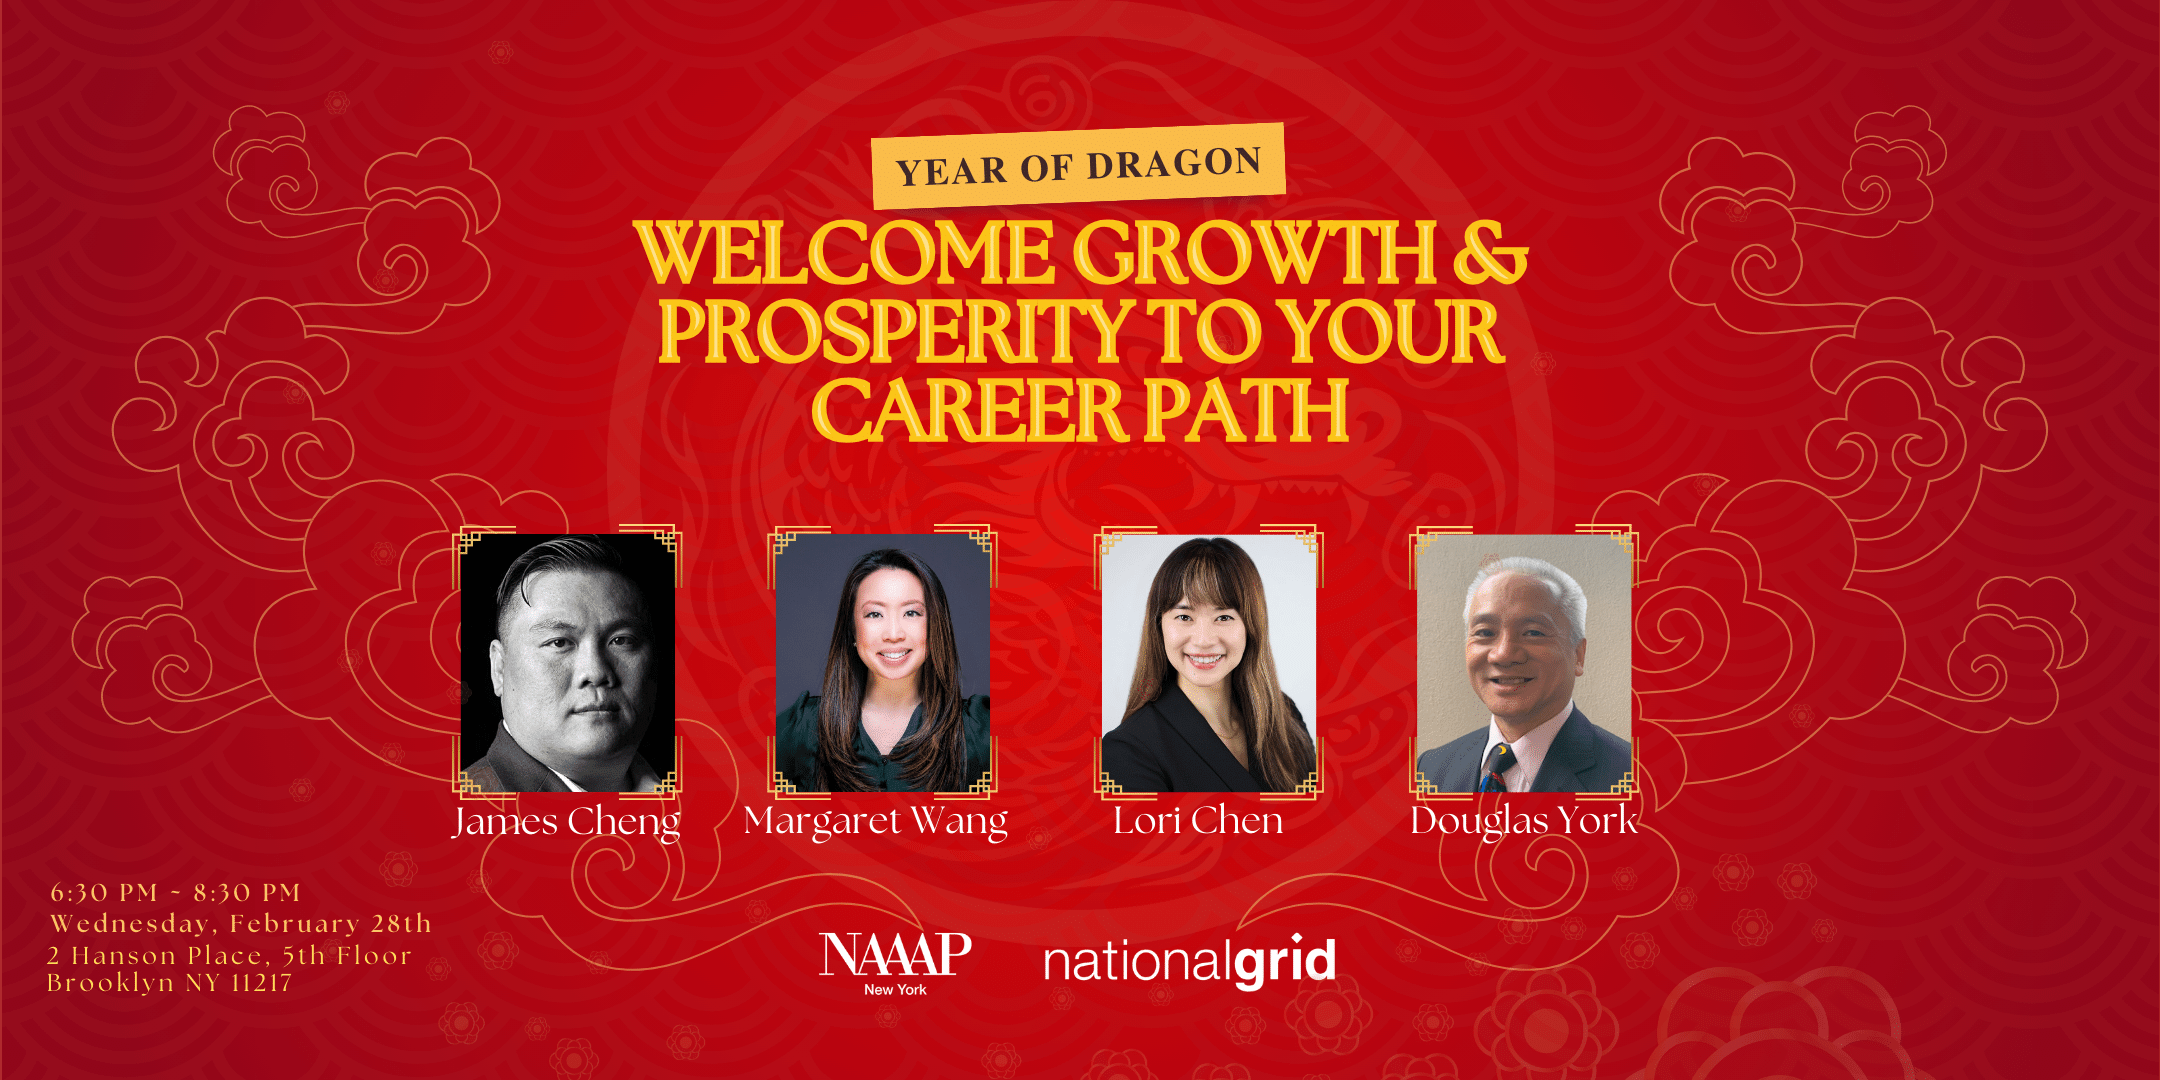 YEAR OF THE DRAGON: Welcoming Growth & Prosperity to Your Career Path